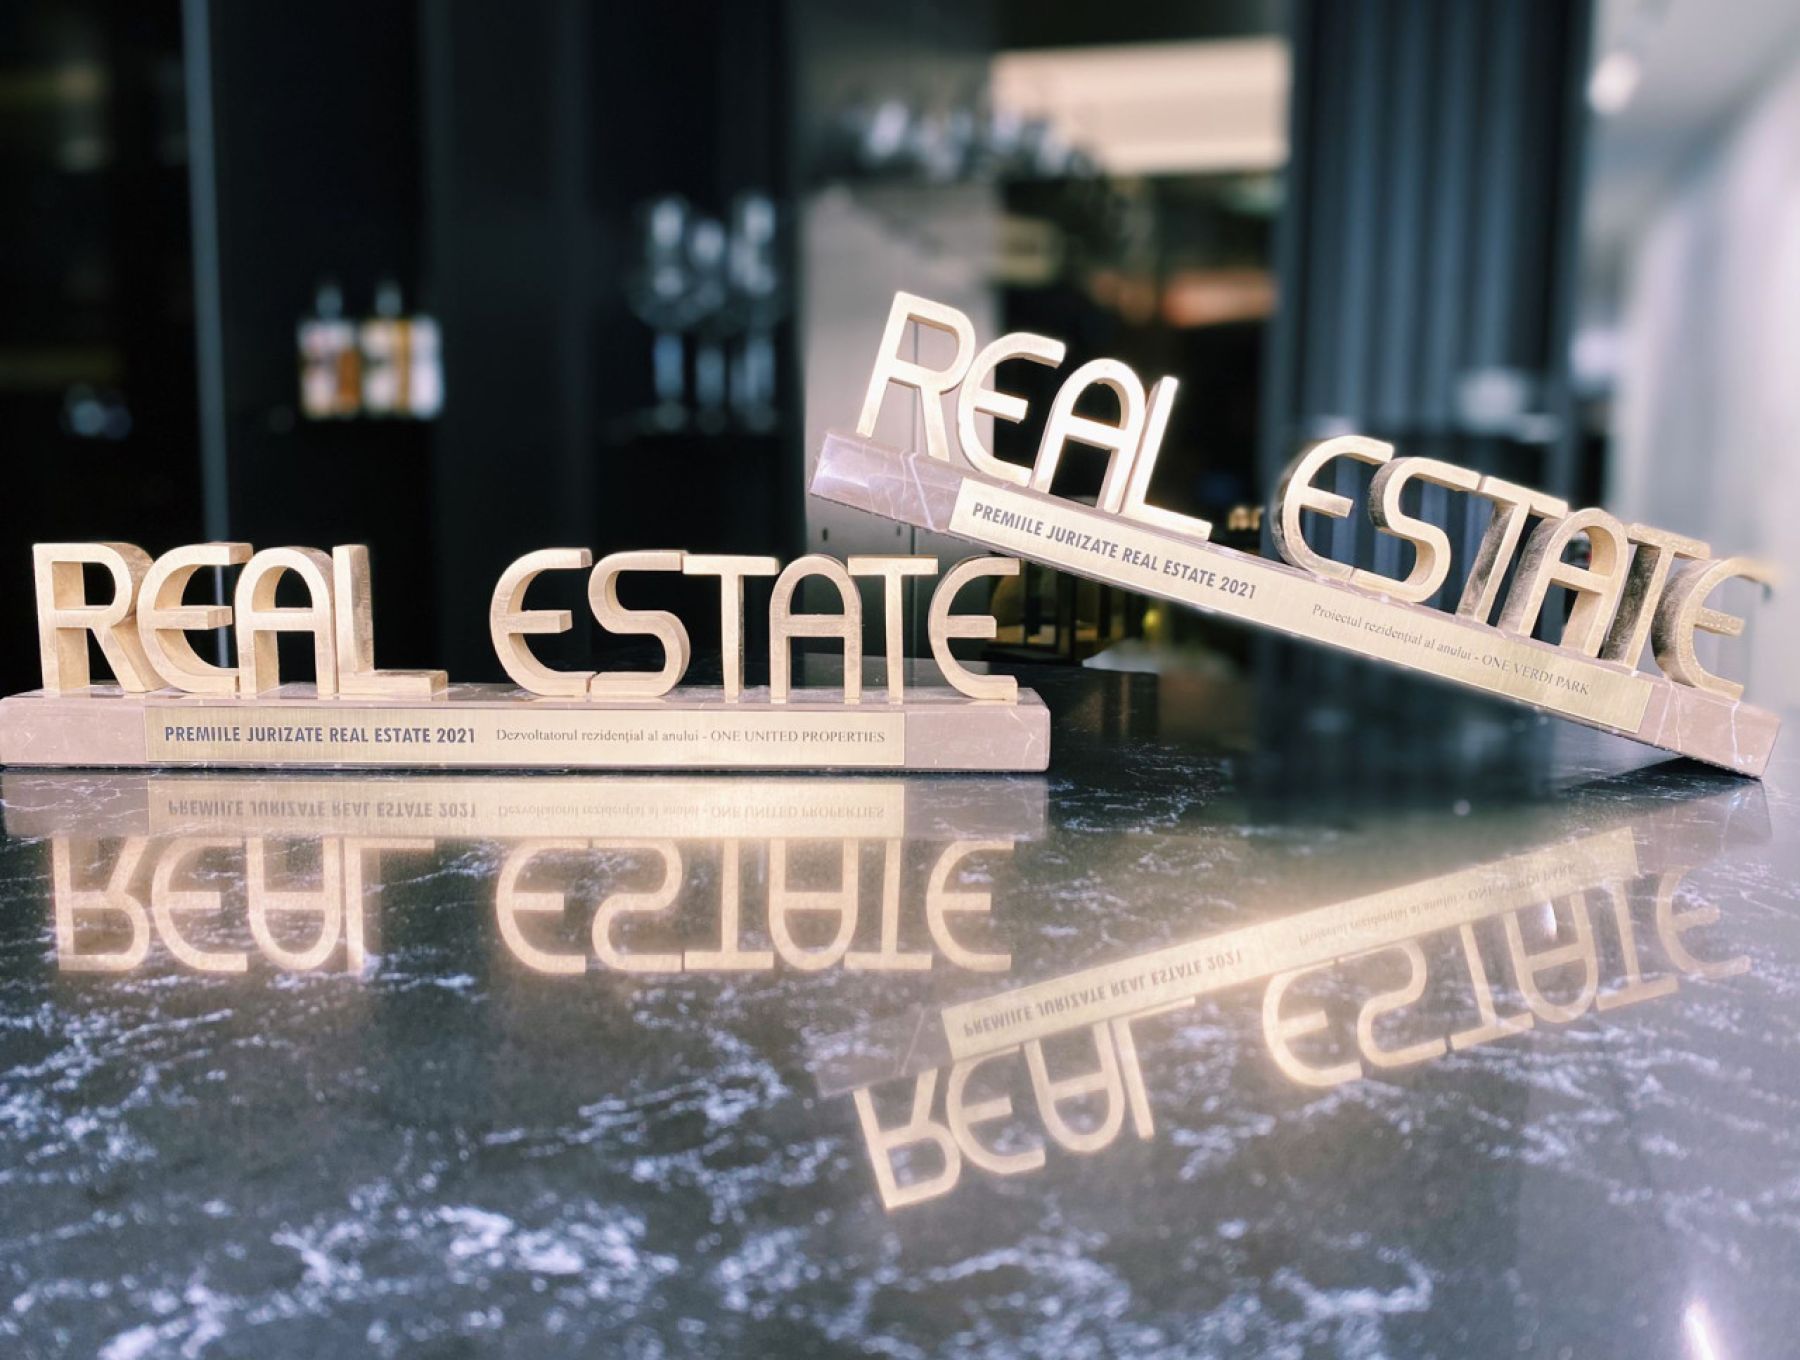 One United Properties and Lemon Interior Design, awarded at the 2021 Real Estate Magazine Gala